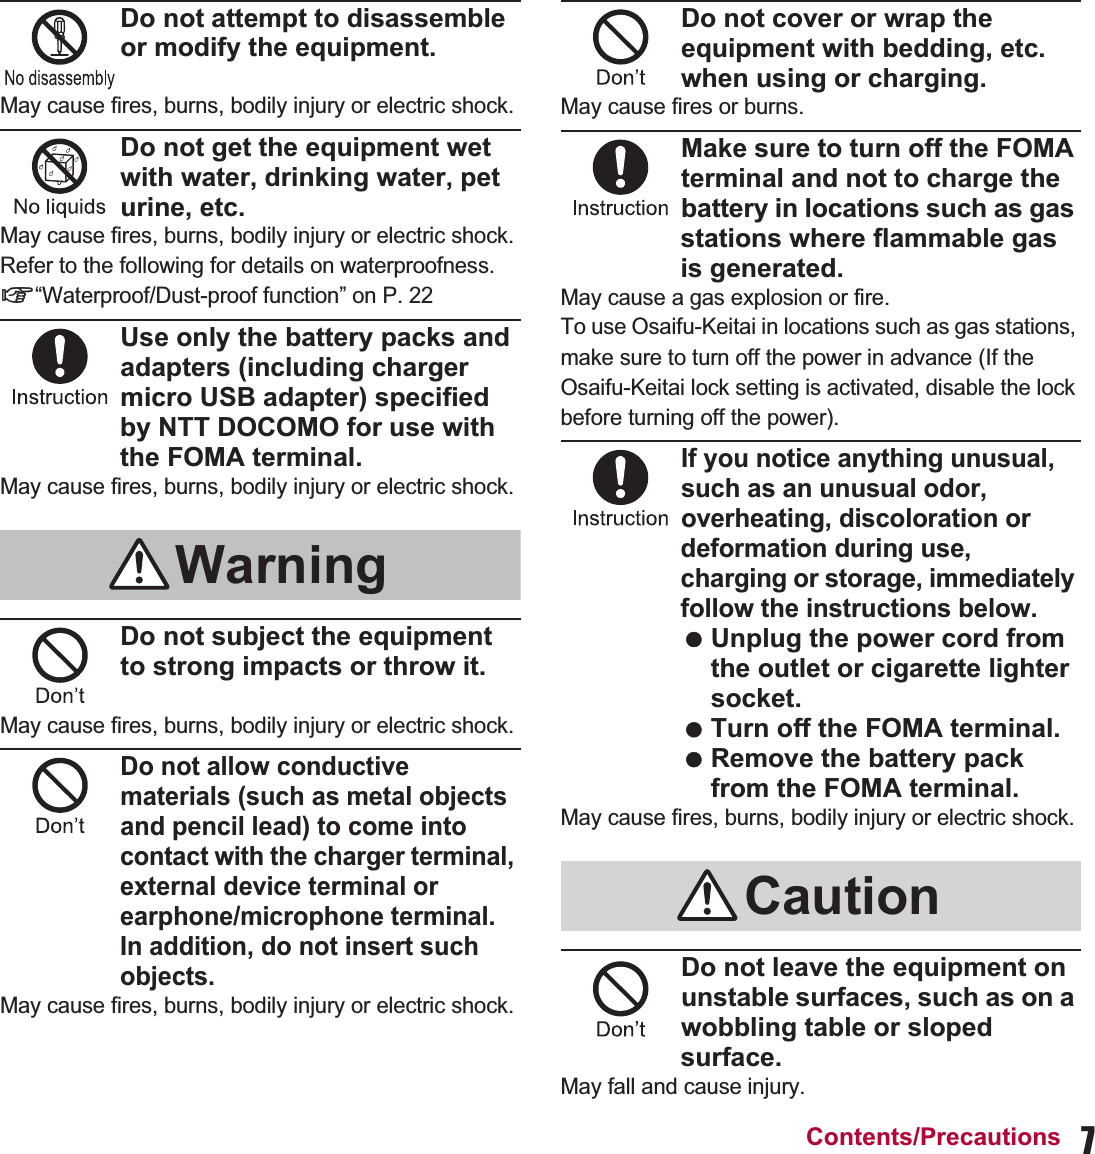 7Contents/PrecautionsDo not attempt to disassemble or modify the equipment.May cause fires, burns, bodily injury or electric shock.Do not get the equipment wet with water, drinking water, pet urine, etc.May cause fires, burns, bodily injury or electric shock.Refer to the following for details on waterproofness.n“Waterproof/Dust-proof function” on P. 22Use only the battery packs and adapters (including charger micro USB adapter) specified by NTT DOCOMO for use with the FOMA terminal.May cause fires, burns, bodily injury or electric shock.Do not subject the equipment to strong impacts or throw it.May cause fires, burns, bodily injury or electric shock.Do not allow conductive materials (such as metal objects and pencil lead) to come into contact with the charger terminal, external device terminal or earphone/microphone terminal. In addition, do not insert such objects.May cause fires, burns, bodily injury or electric shock.Do not cover or wrap the equipment with bedding, etc. when using or charging.May cause fires or burns.Make sure to turn off the FOMA terminal and not to charge the battery in locations such as gas stations where flammable gas is generated.May cause a gas explosion or fire.To use Osaifu-Keitai in locations such as gas stations, make sure to turn off the power in advance (If the Osaifu-Keitai lock setting is activated, disable the lock before turning off the power).If you notice anything unusual, such as an unusual odor, overheating, discoloration or deformation during use, charging or storage, immediately follow the instructions below. Unplug the power cord from the outlet or cigarette lighter socket. Turn off the FOMA terminal. Remove the battery pack from the FOMA terminal.May cause fires, burns, bodily injury or electric shock.Do not leave the equipment on unstable surfaces, such as on a wobbling table or sloped surface.May fall and cause injury.WarningCaution